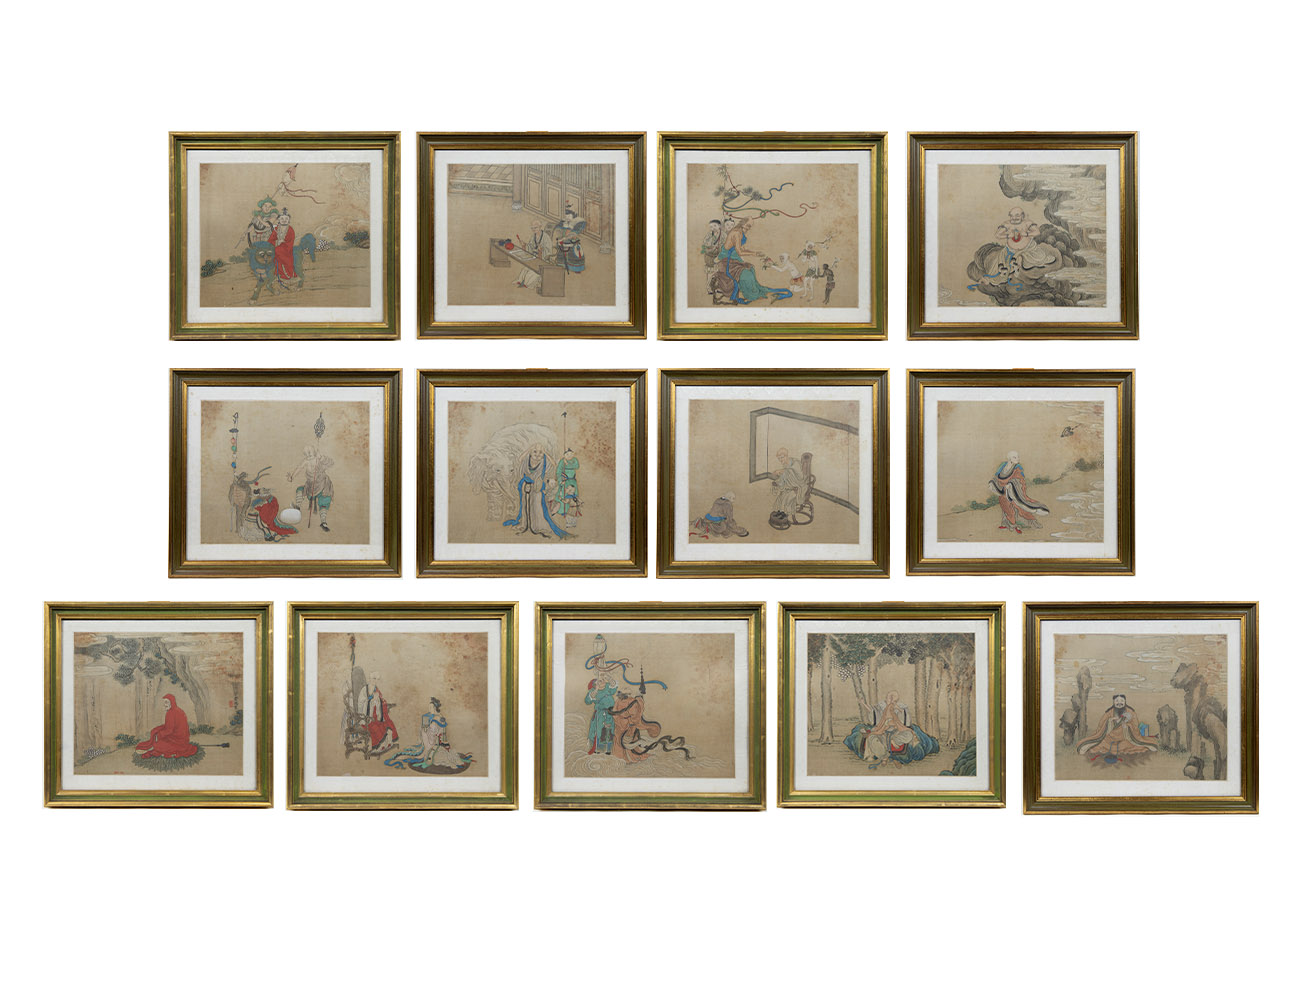 Set of 13 Chinese coloured drawings on silk, 19th century, some are signed